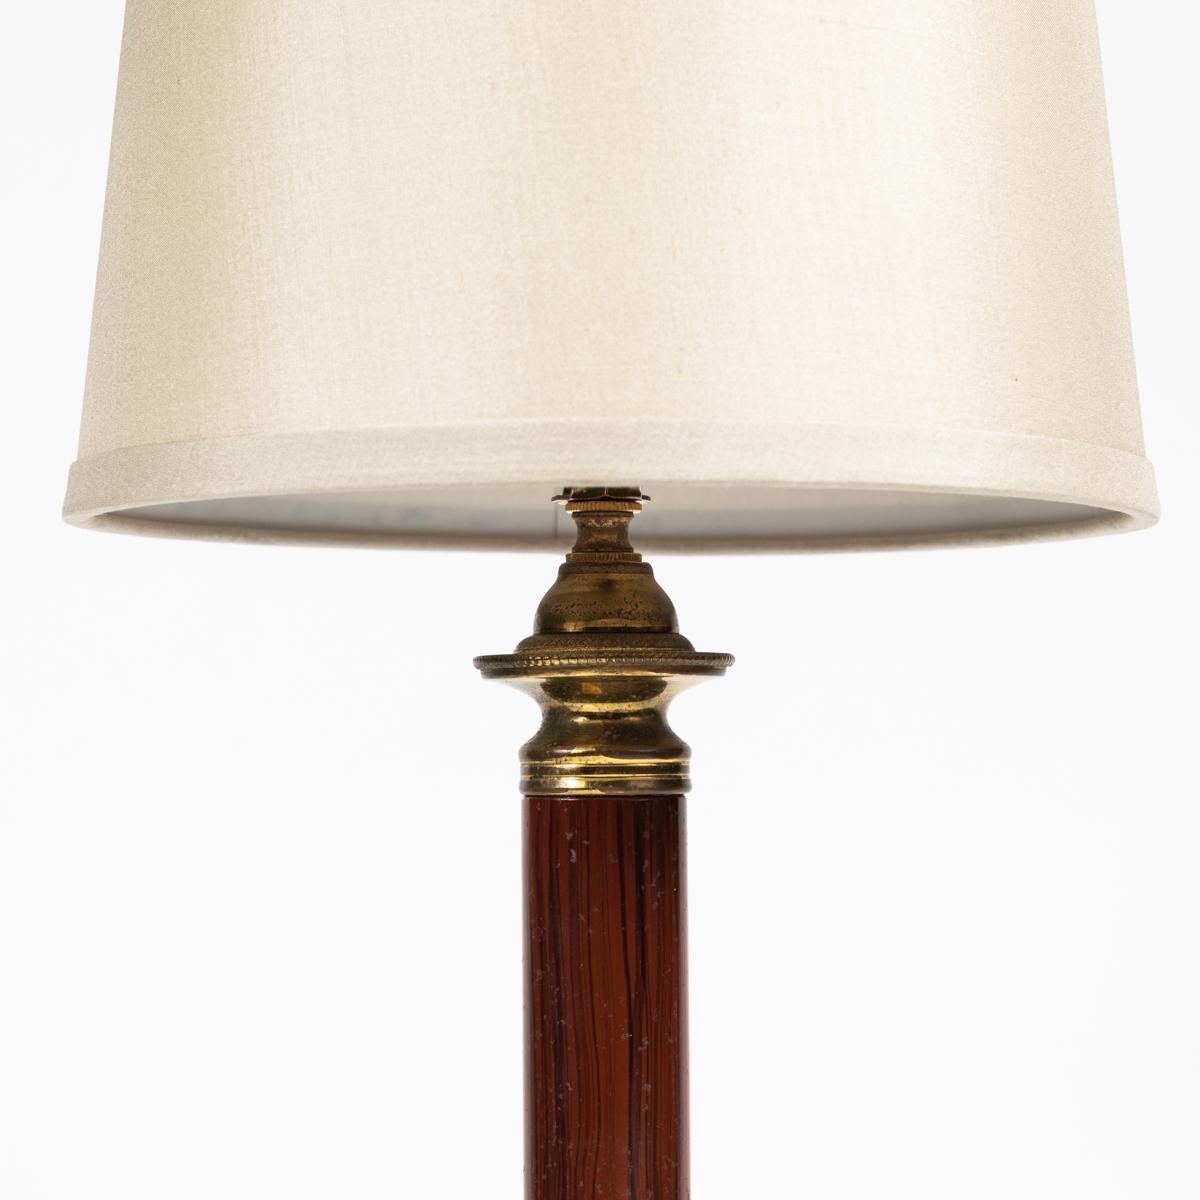 Neoclassical marble column and tole table lamp with lovely custom cream-colored linen shade. Tole is a painted, enameled, or lacquered tinplate used in decorative domestic objects, and in this case was used to create the illusion of wood. With its